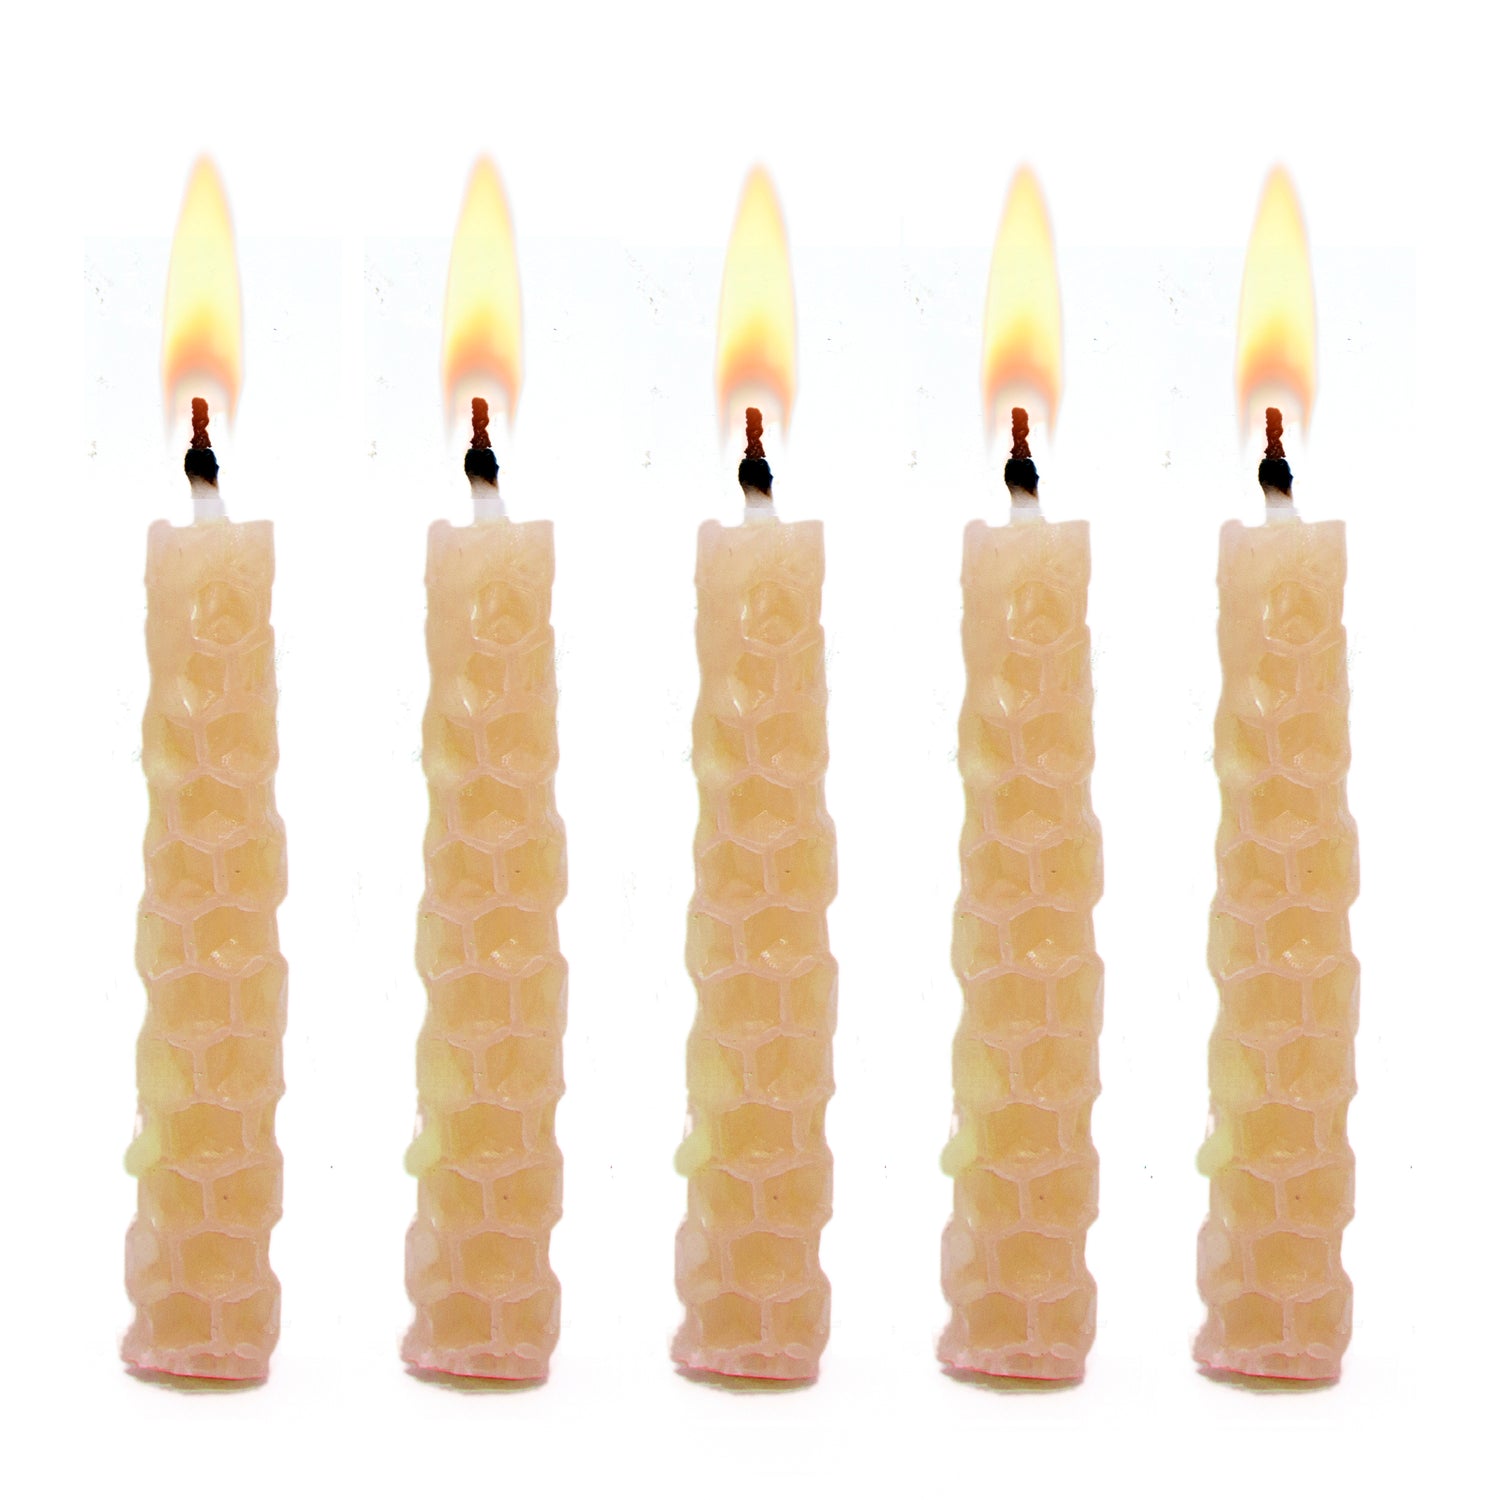 Beeswax Candle Making Kit (8.44” x 8.36” x 1.25”) - Candle Making Supplies for Kids & Adults - Candle DIY Kit for Easy & Fun Activities - All